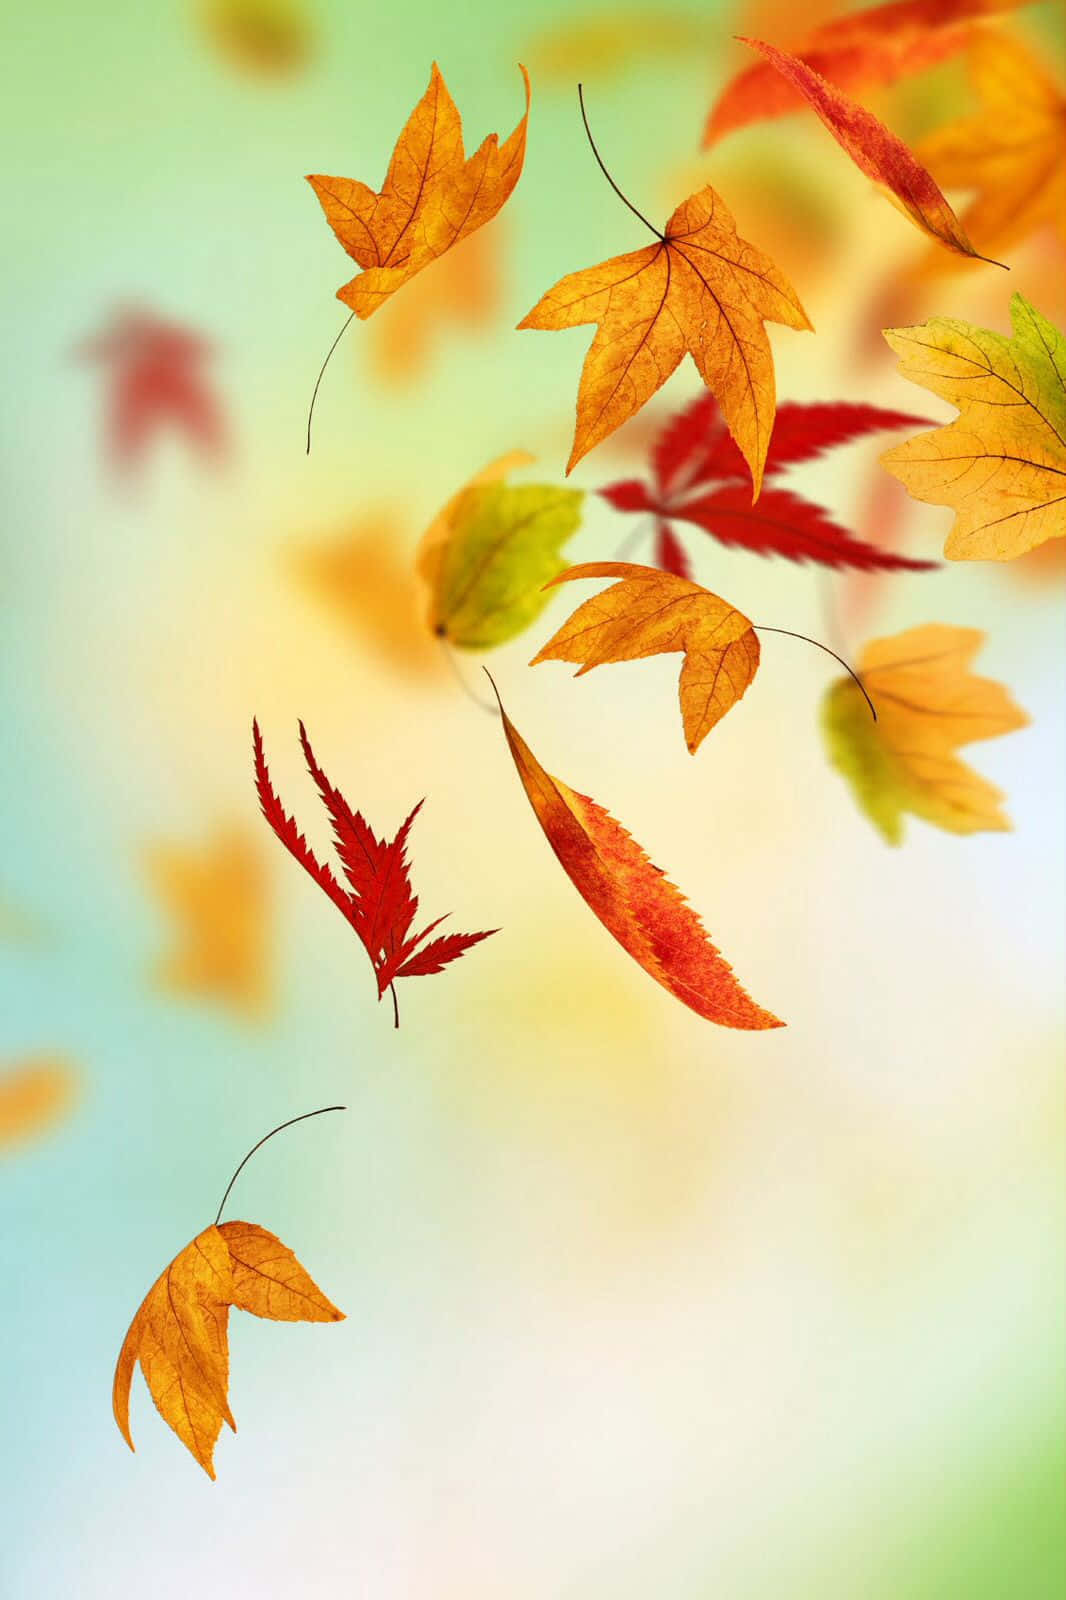 Embrace the golden season of Fall with Autumn Leaves Phone Wallpaper